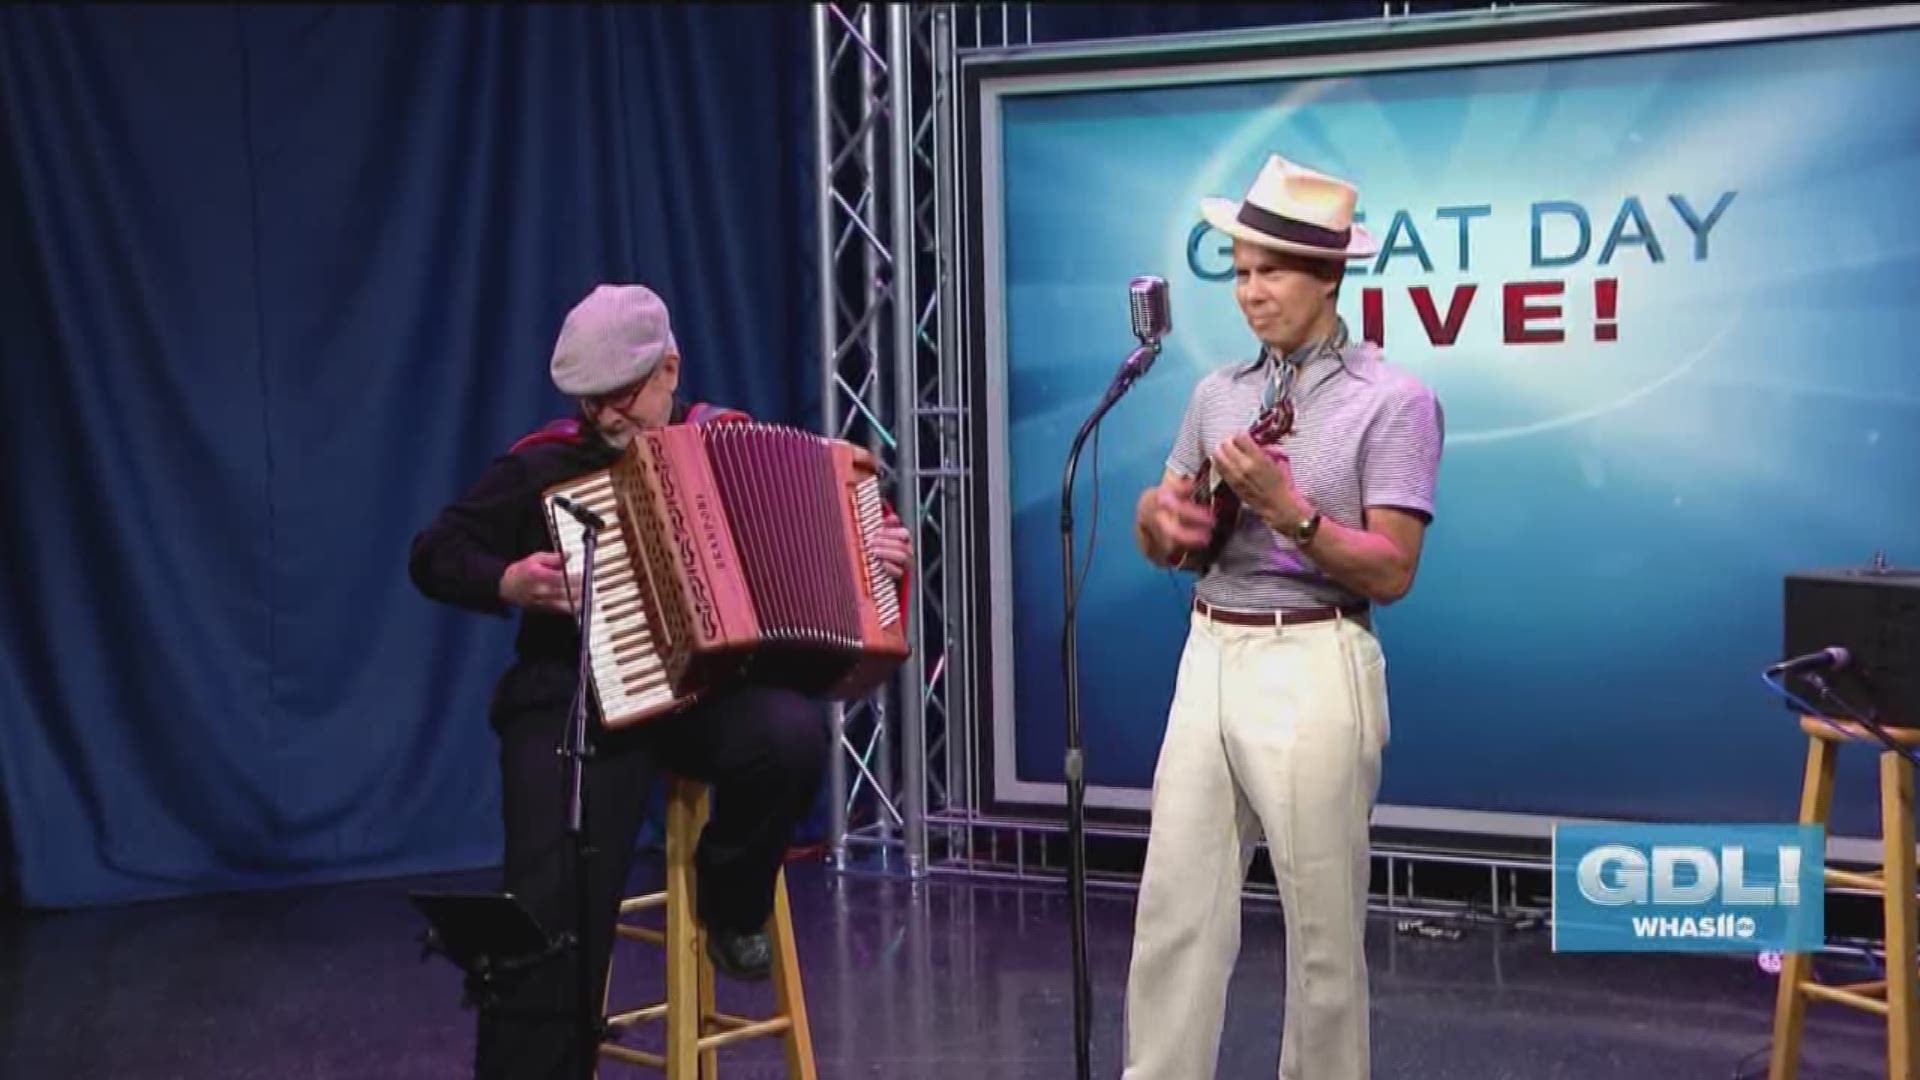 The Derby City Dandies stopped by Great Day Live to perform a couple songs.